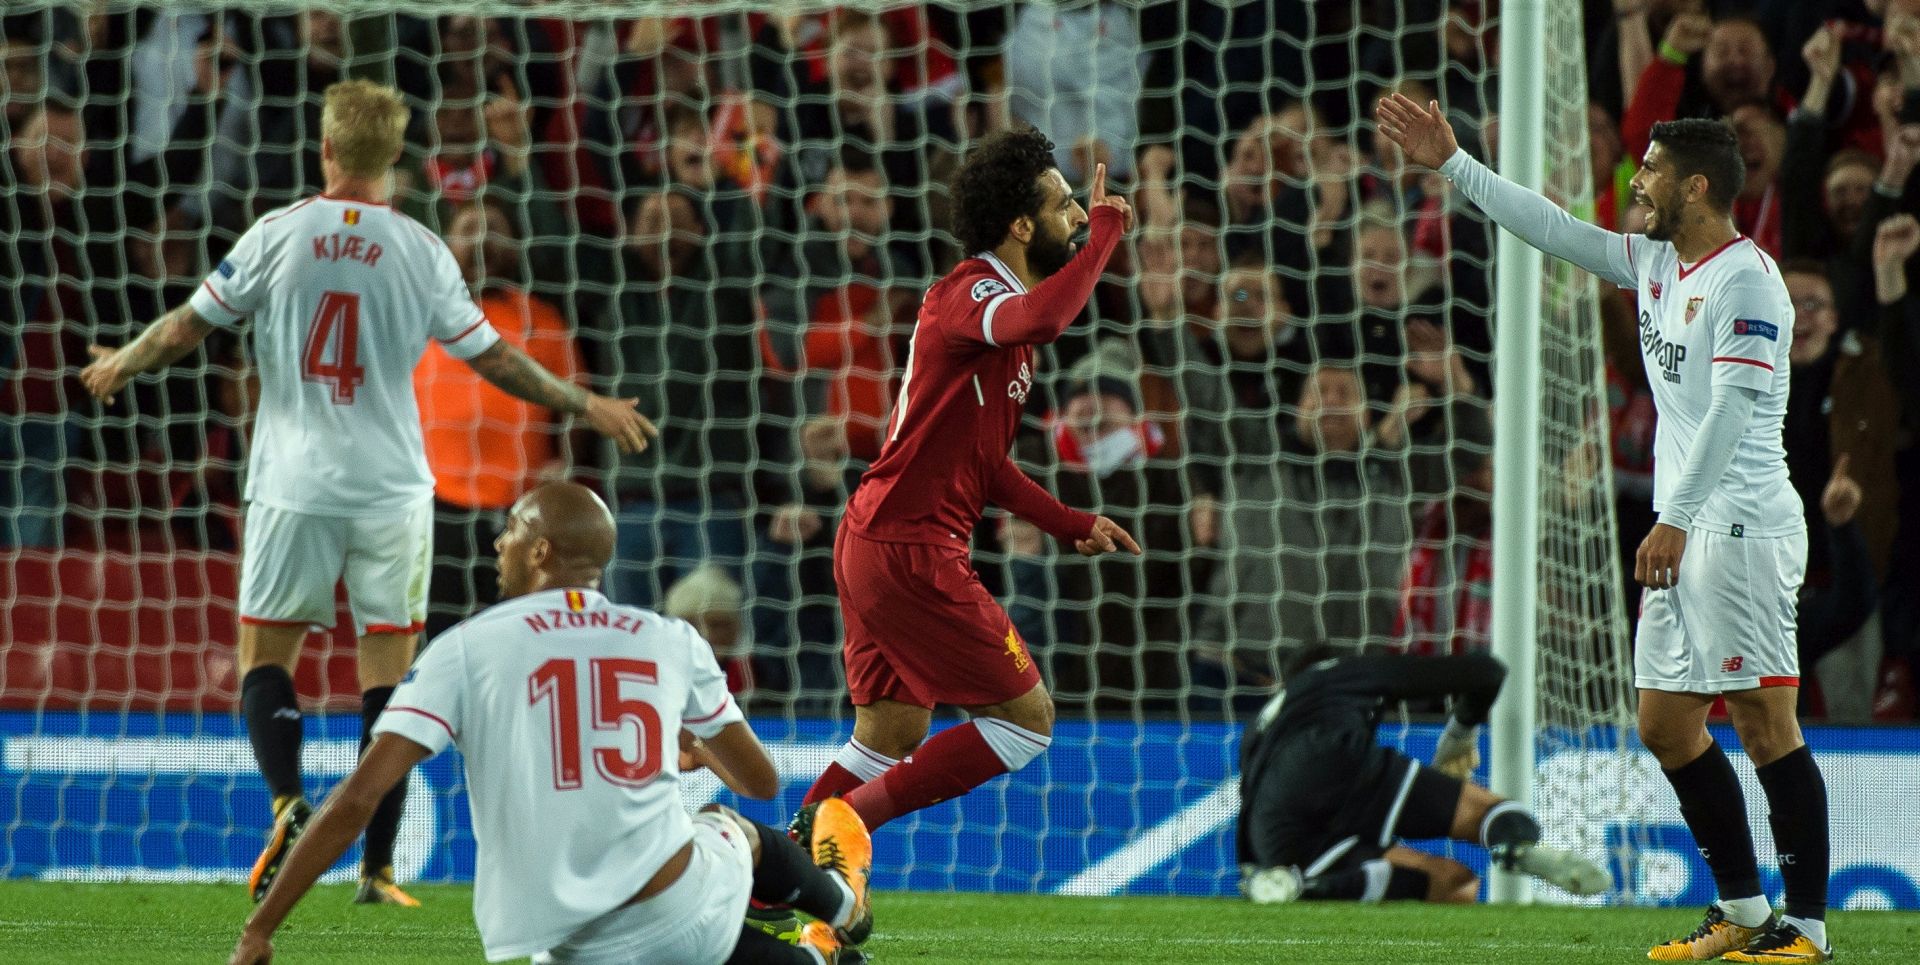 epa06202931 Liverpoolâ€™s Mohamed Salah (C) celebrates scoring during the UEFA Champions League Group E match between FC Liverpool and Sevilla FC held at Anfield, Liverpool, Britain, 13 September 2017.  EPA/Peter Powell